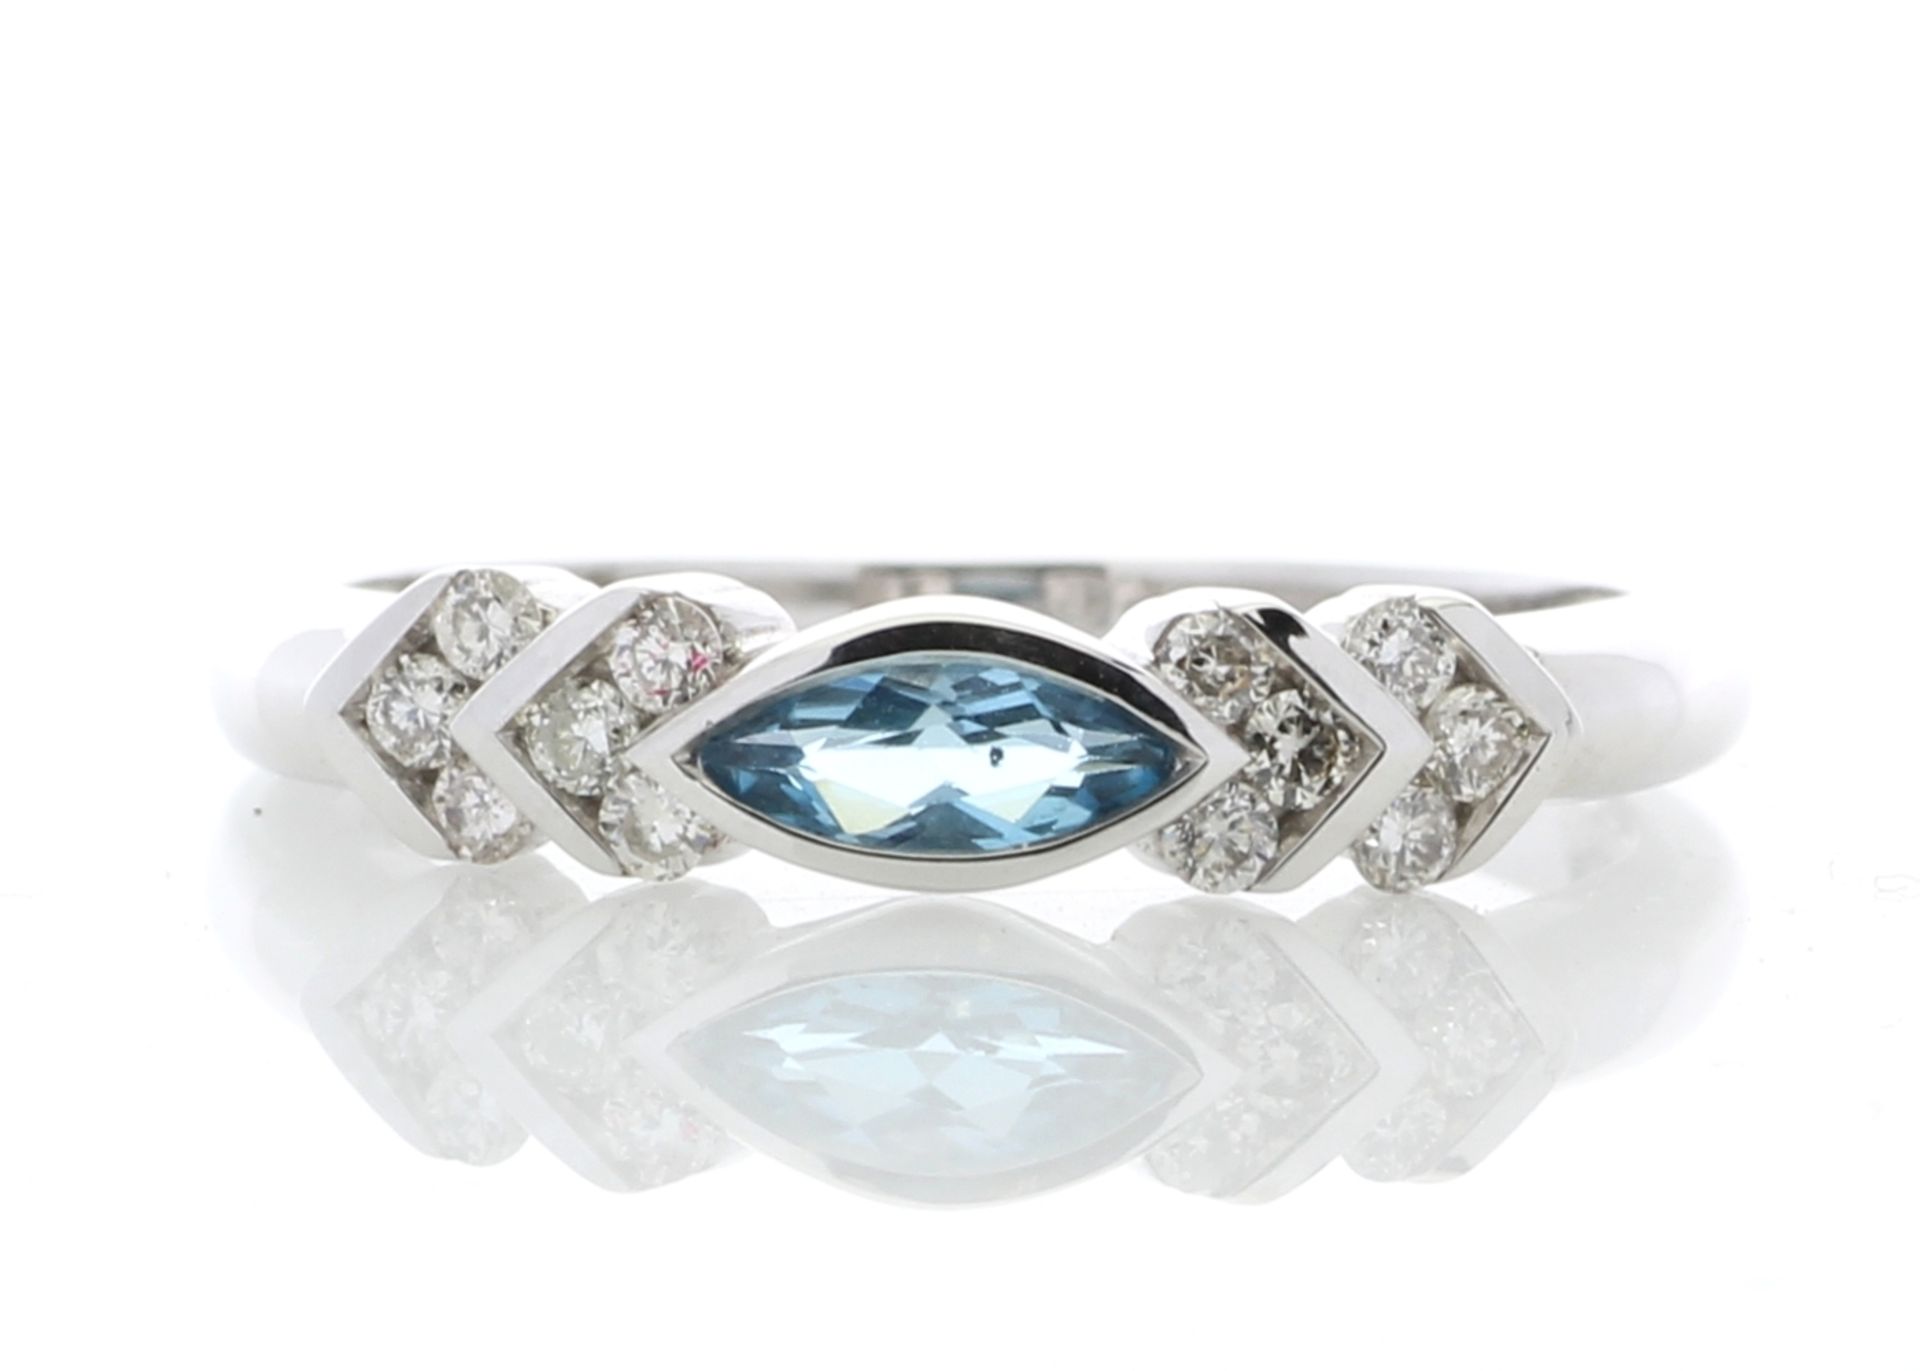 9ct White Gold Diamond And Blue Topaz Ring 0.17 Carats